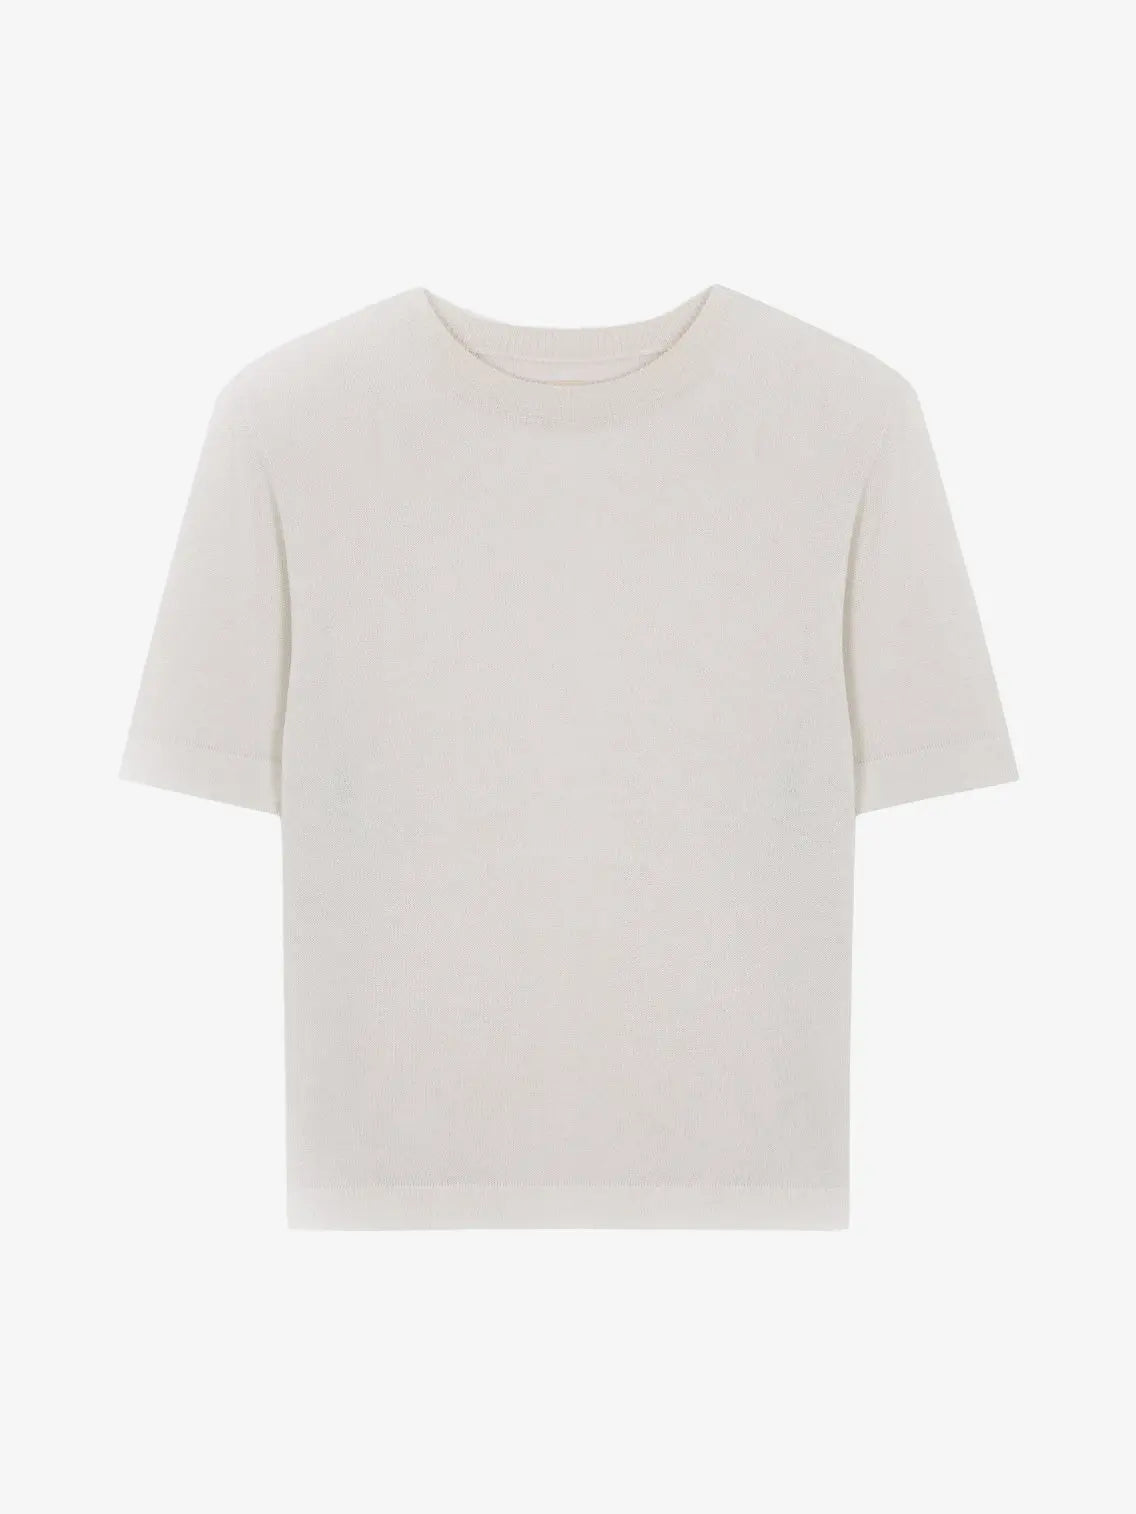 A plain, short-sleeved, white Viscose T-Shirt Marshmallow with a round neckline from Cordera displayed against a white background. Available at bassalstore in Barcelona, this shirt is simple and unadorned, highlighting its clean and minimalist design.